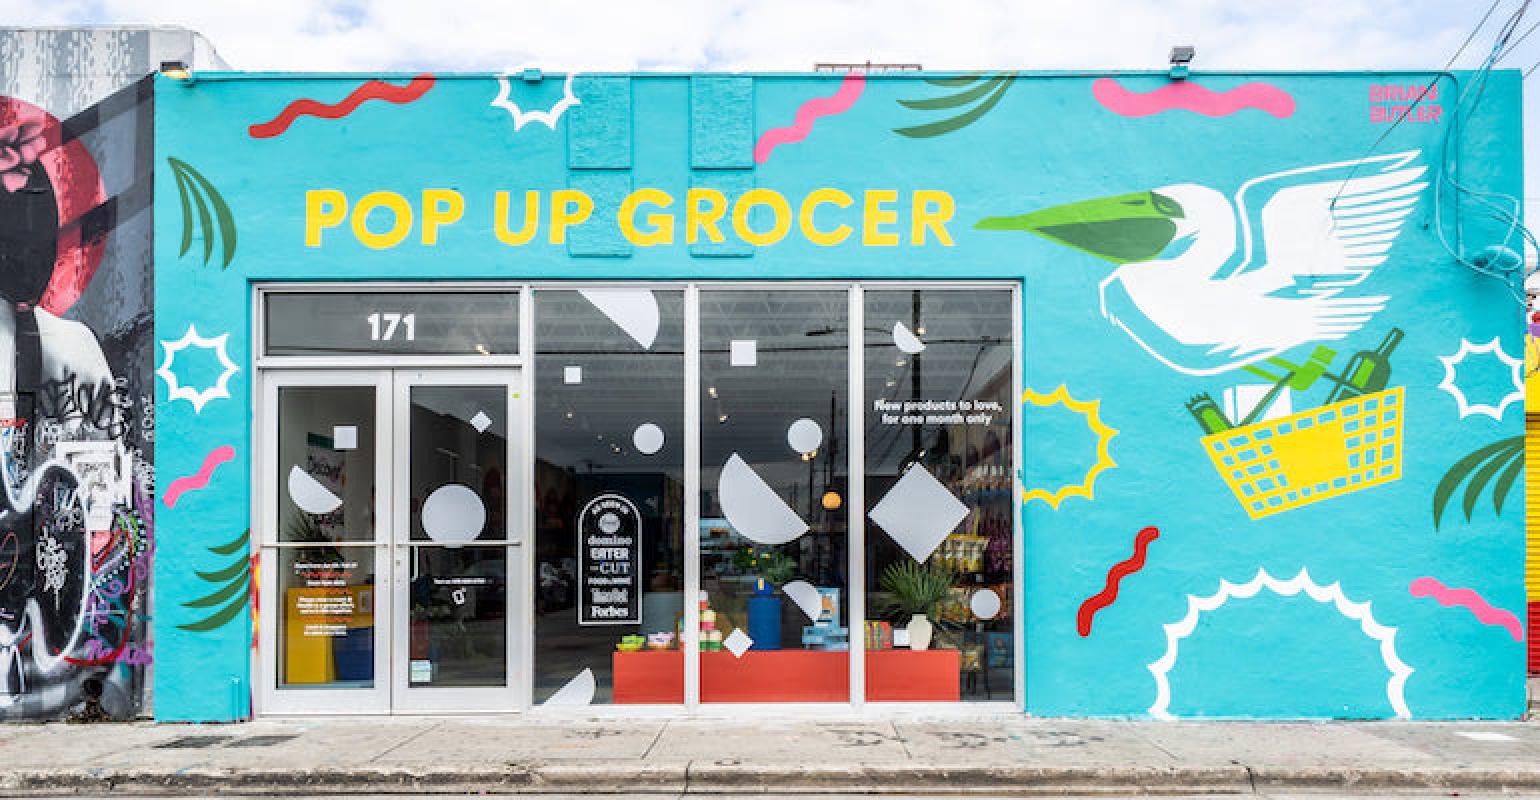 Pop Up Grocer (@popup.grocer) • Instagram photos and videos